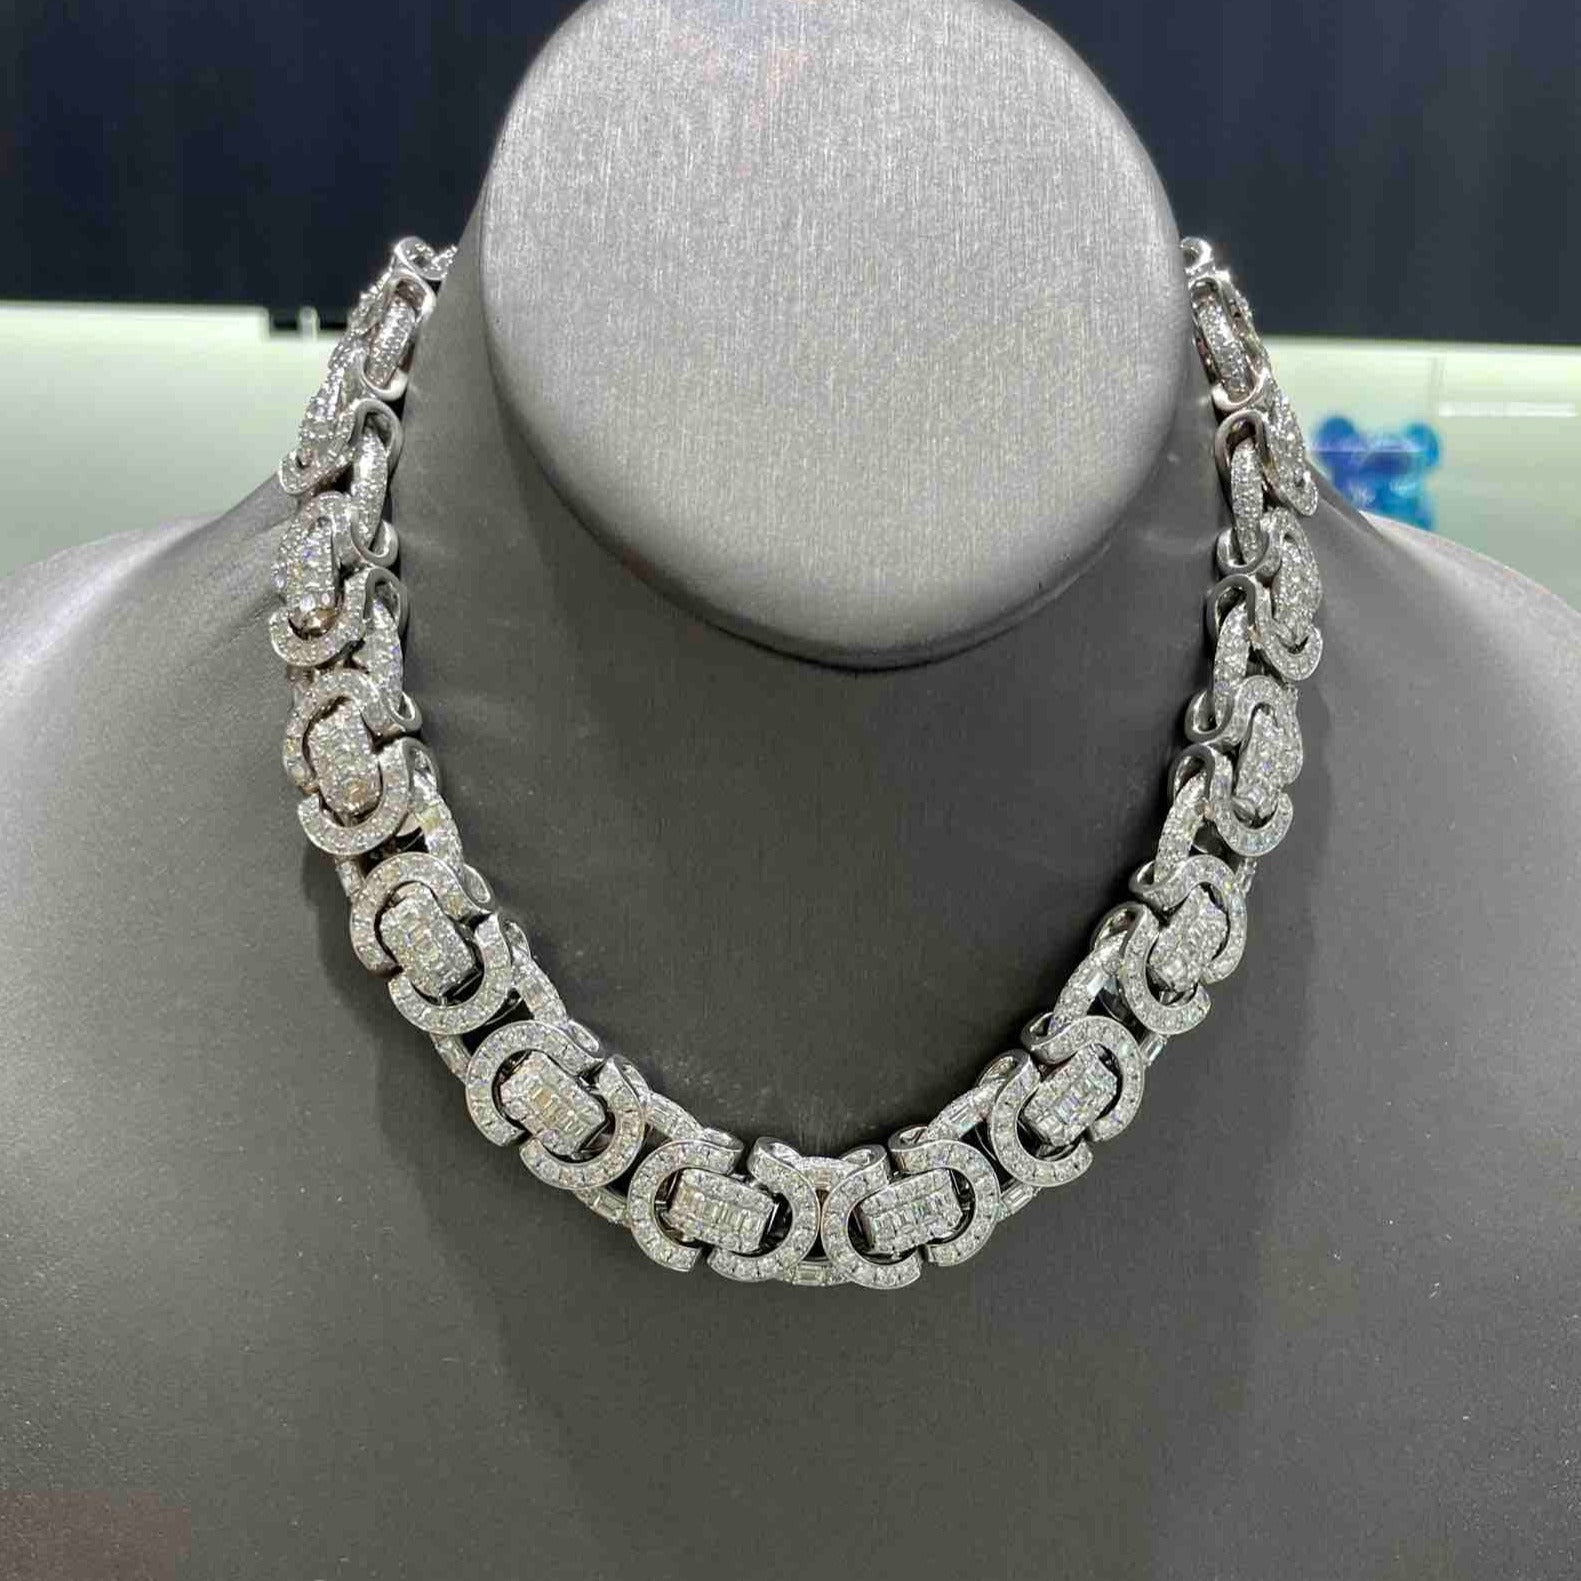 bust down byzantine chain "gucci mane chain" 14k white gold 366 grams and 90 cts vvs1 natural diamonds t.w.  crazy custom one of one iced out chain